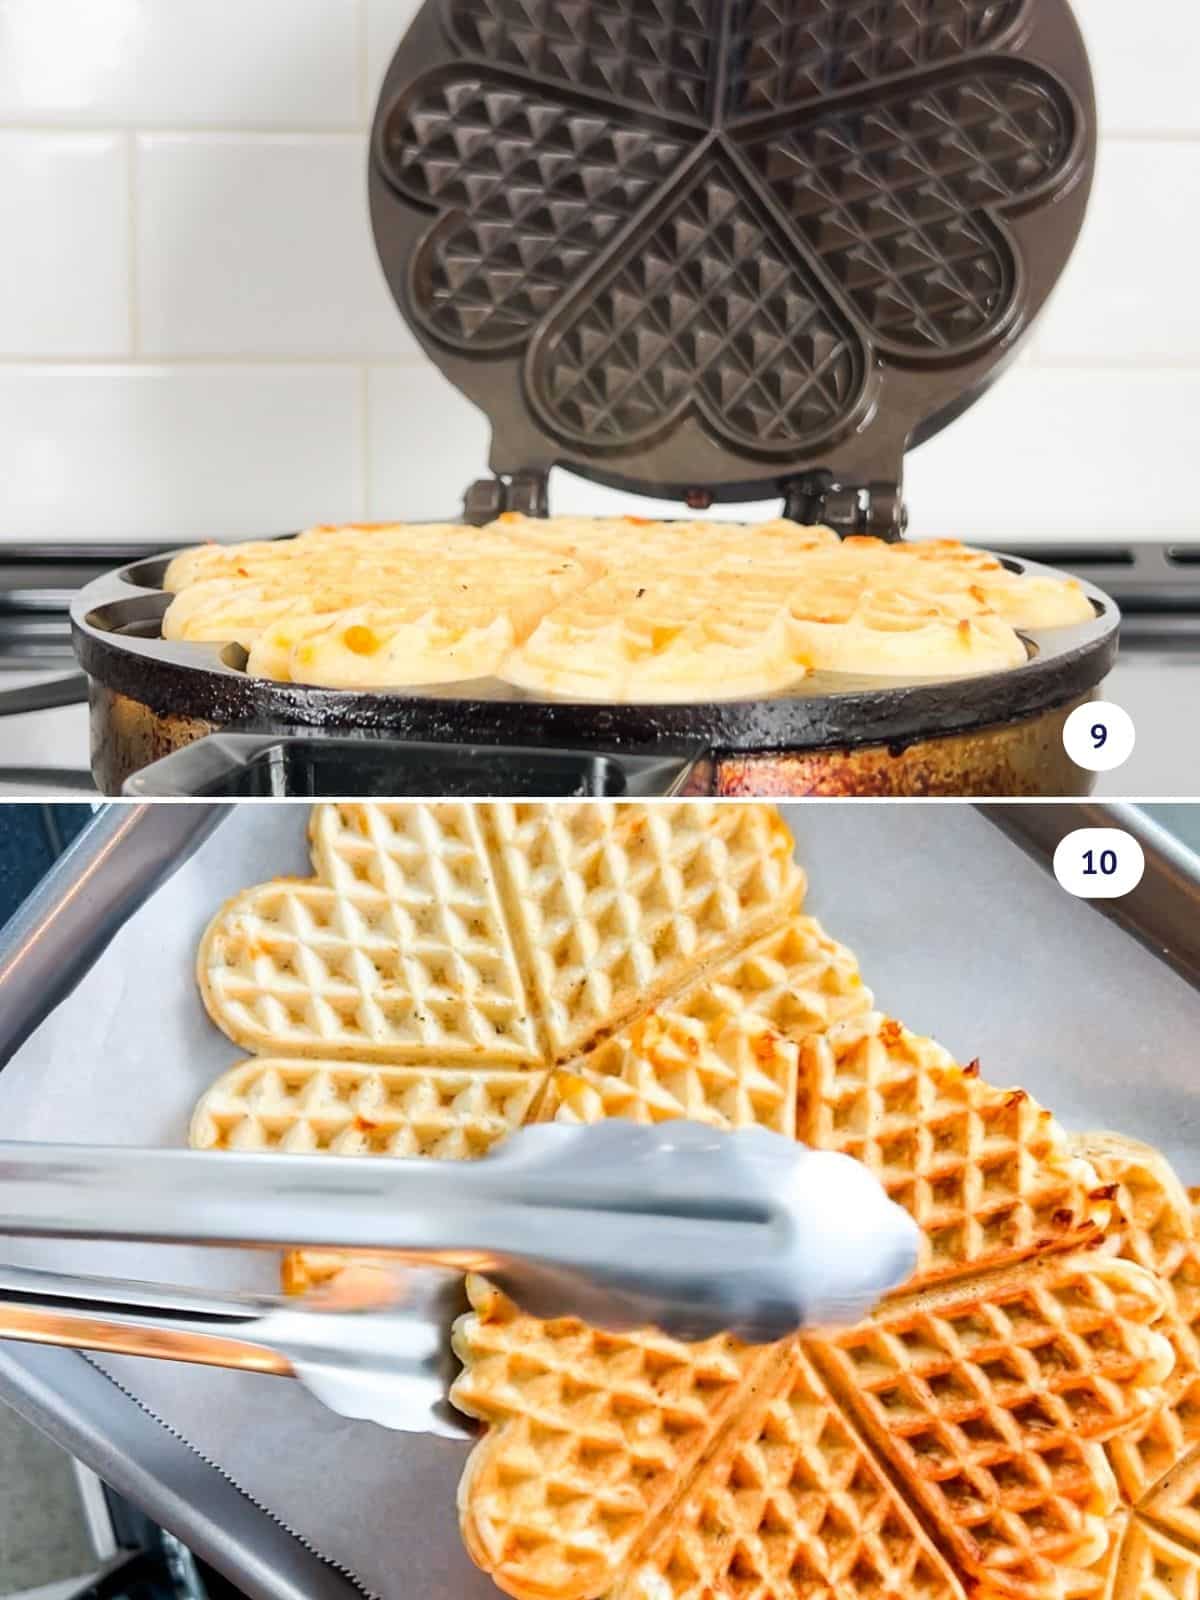 Cooking waffles in a waffle iron before transferring them to the oven to keep them warm.